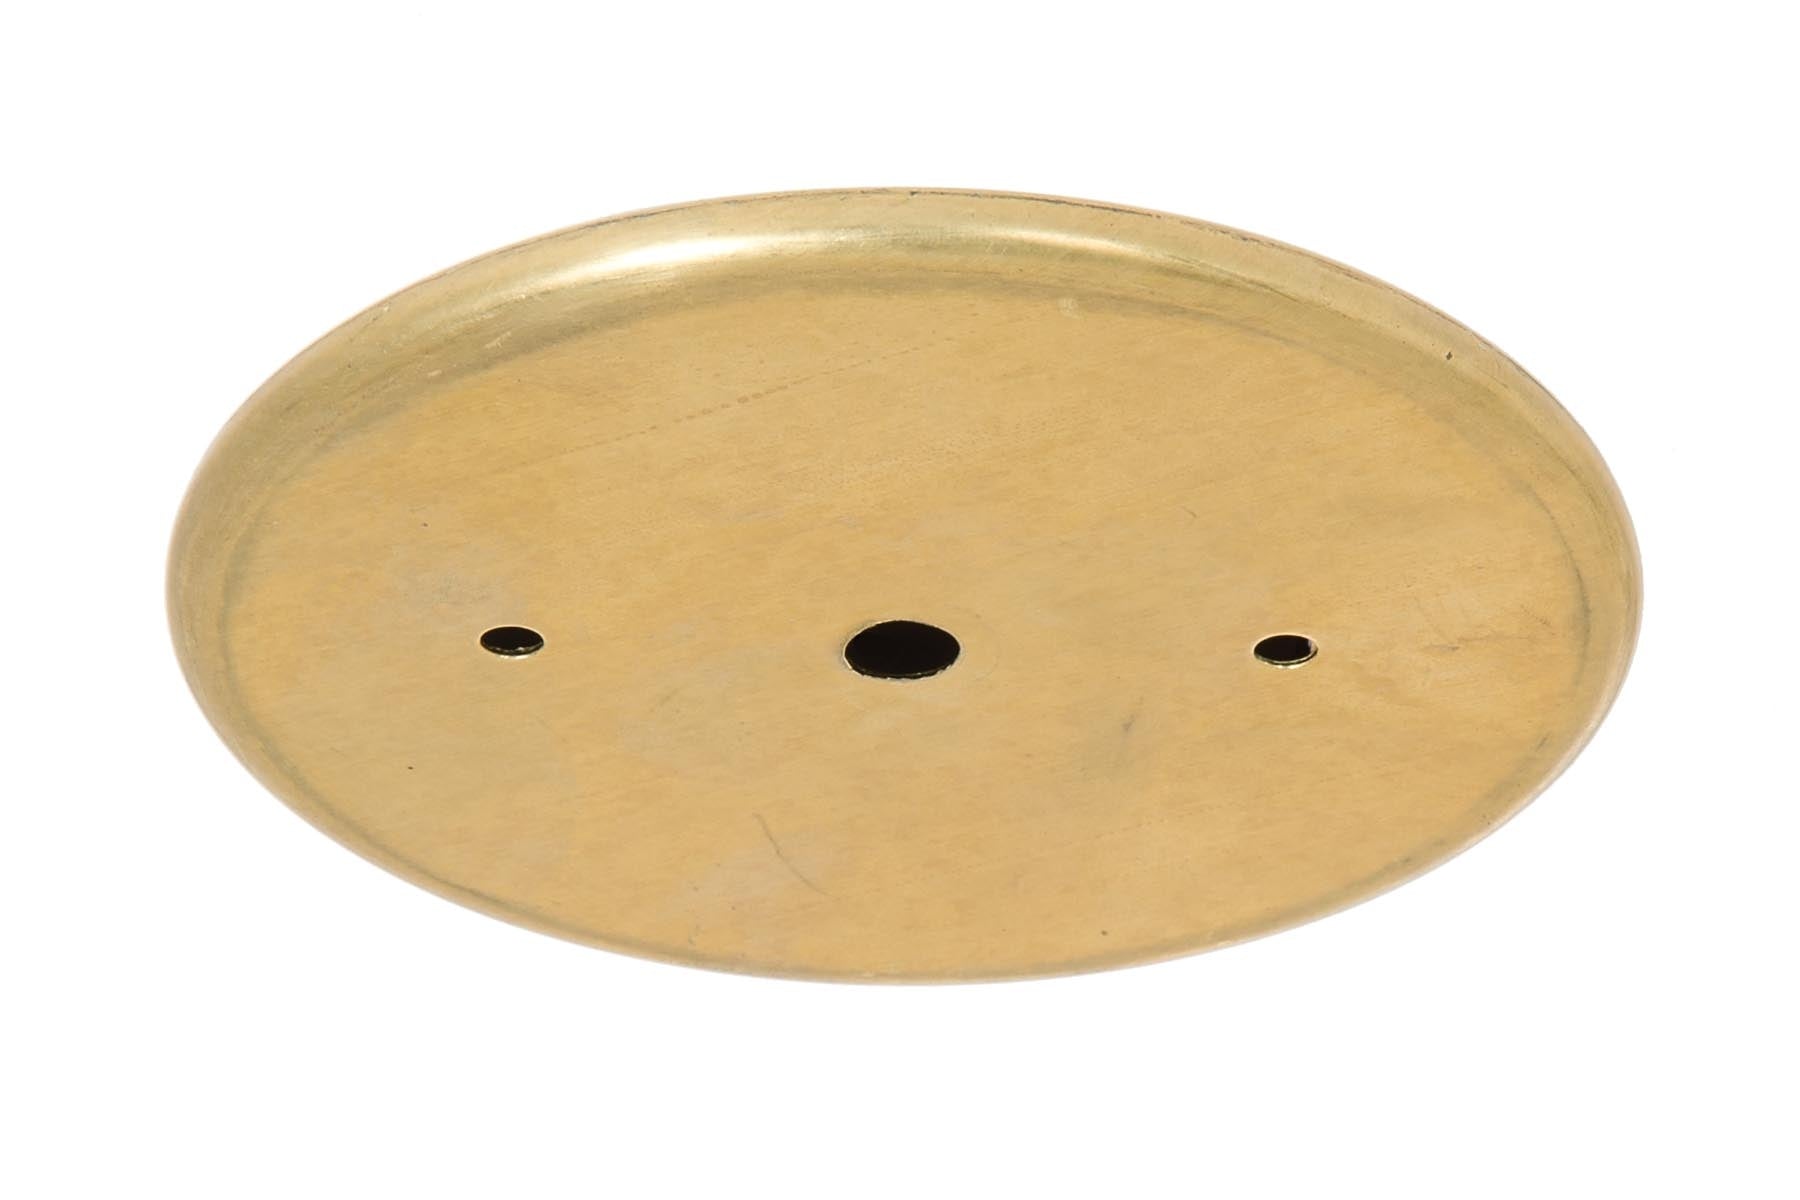 5-1/4 Inch Diameter Versatile Flat Radial Edge Brass Ceiling Canopy with Mounting Hardware Kit